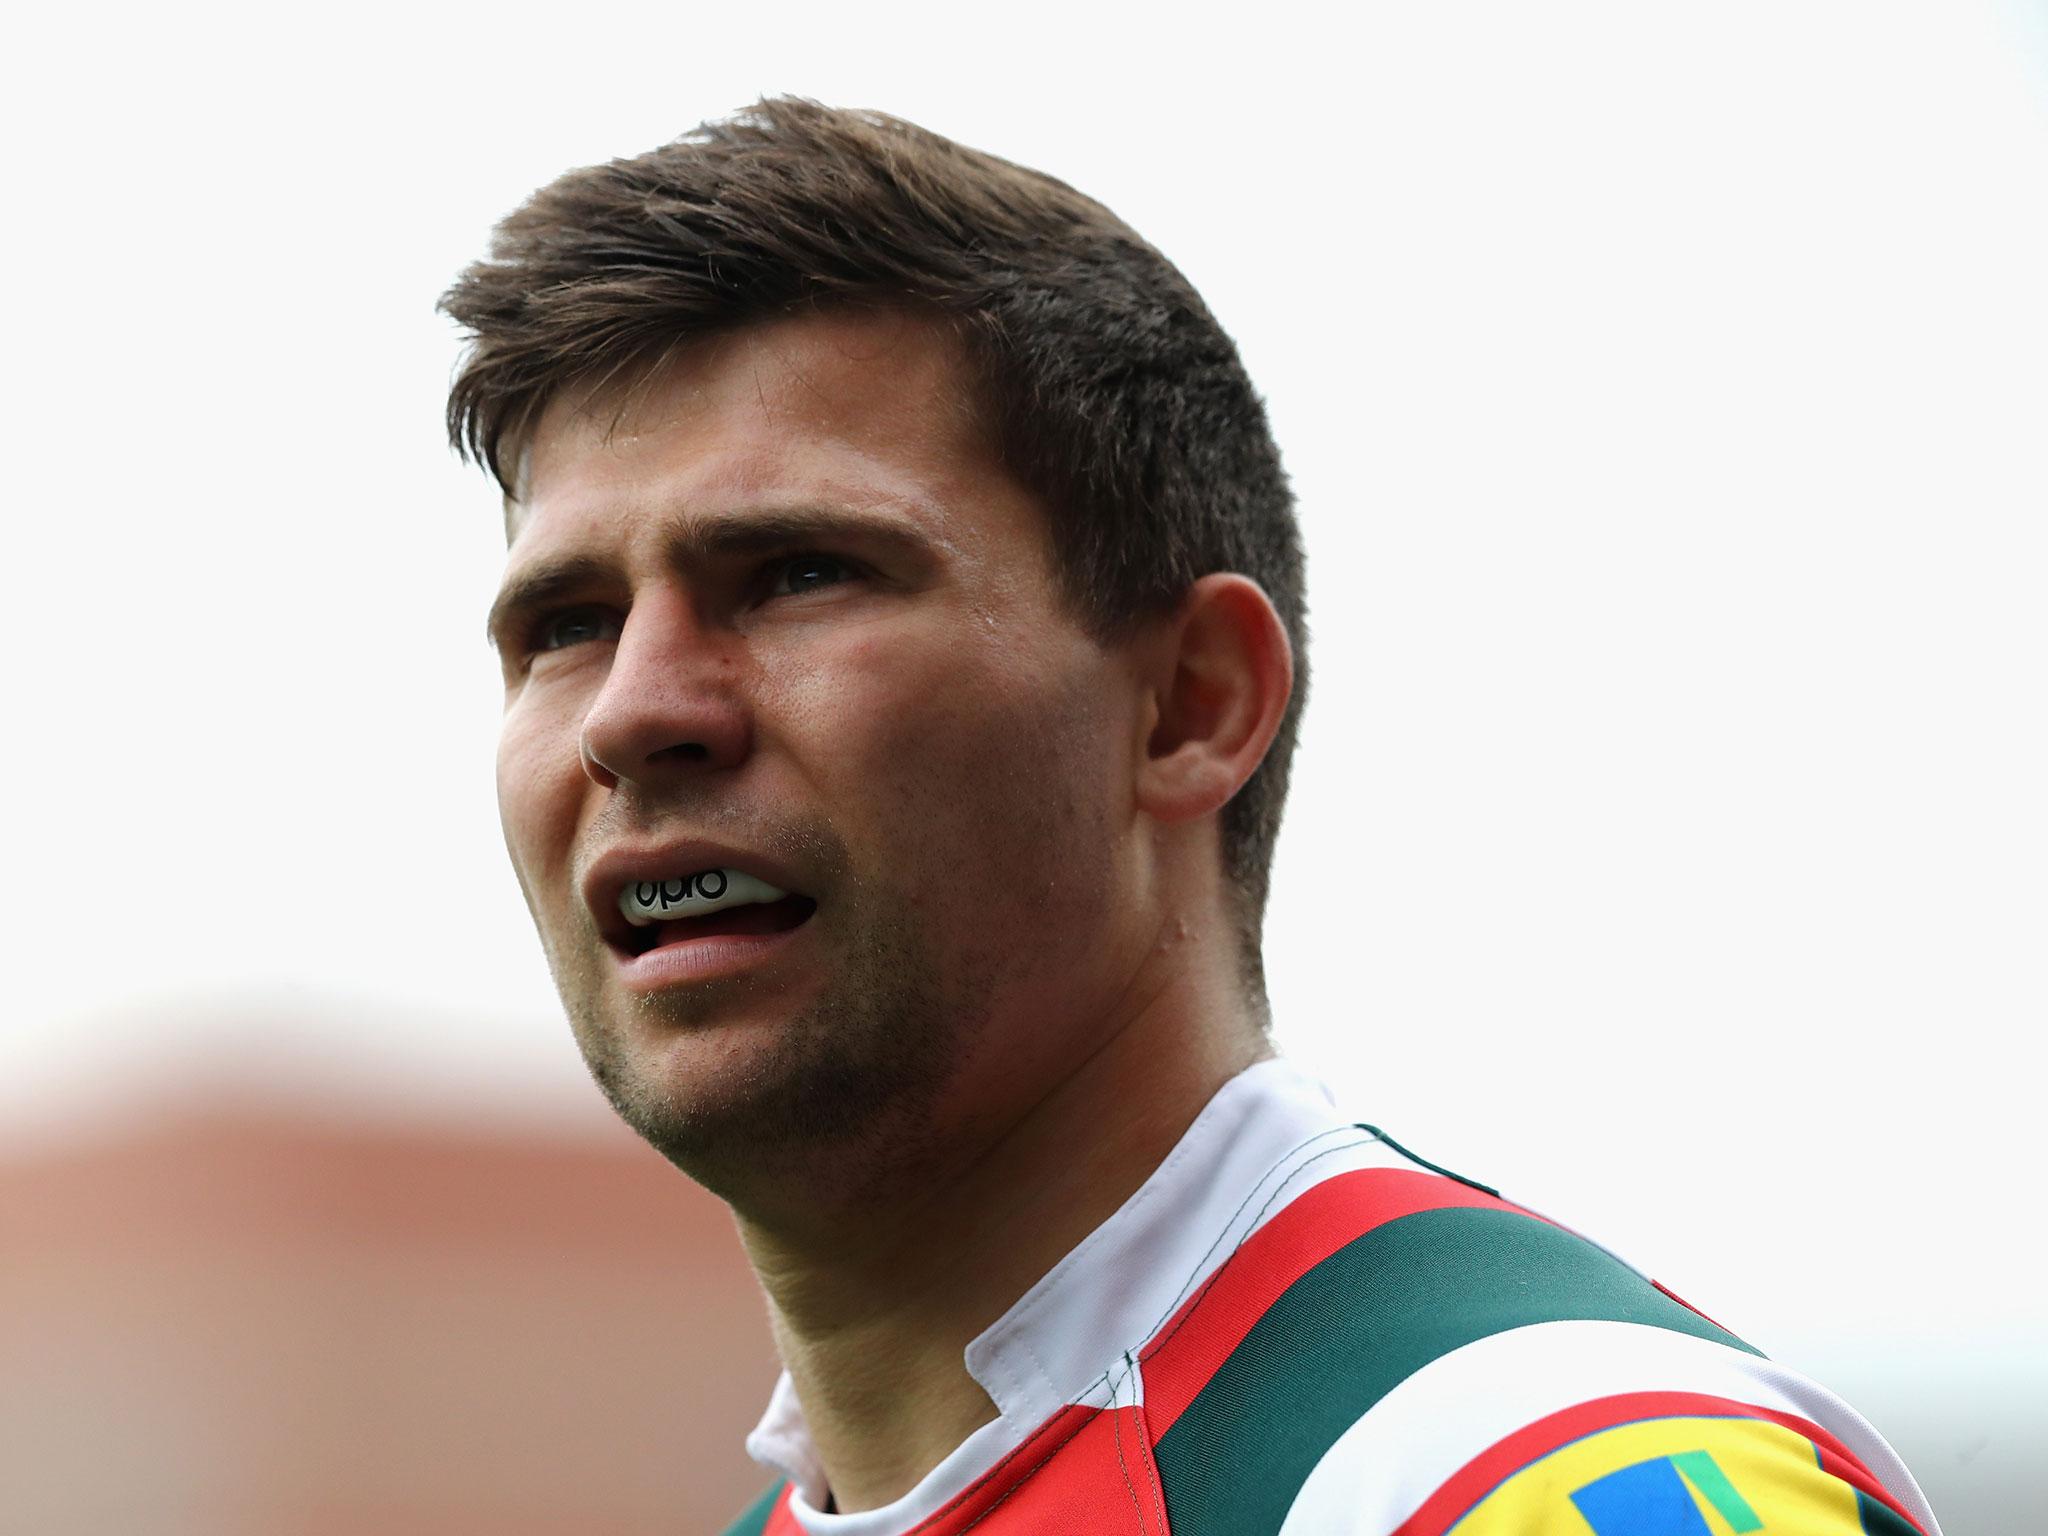 Ben Youngs pulled out of the British and Irish Lions tour due to personal reasons